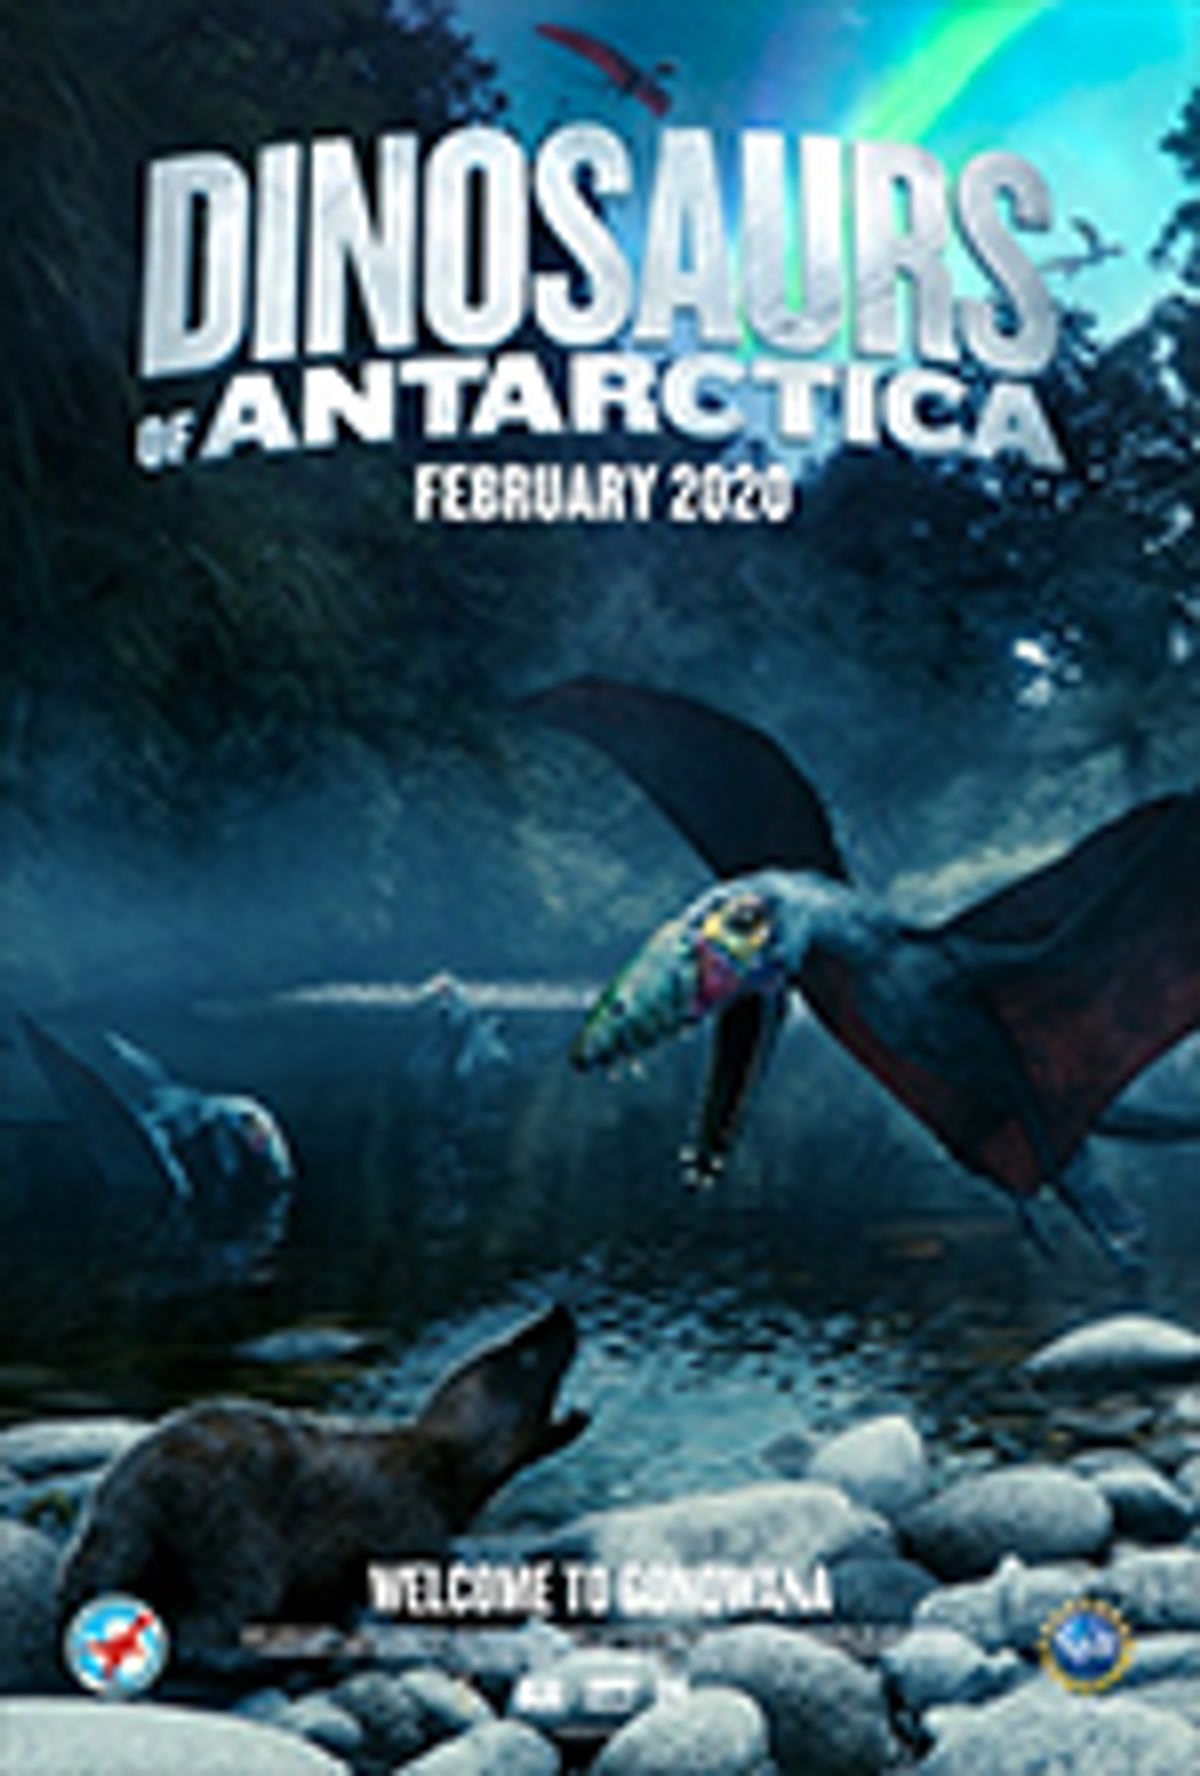 Showtimes for Dinosaurs of Antarctica (2019) - Seattle Events Calendar